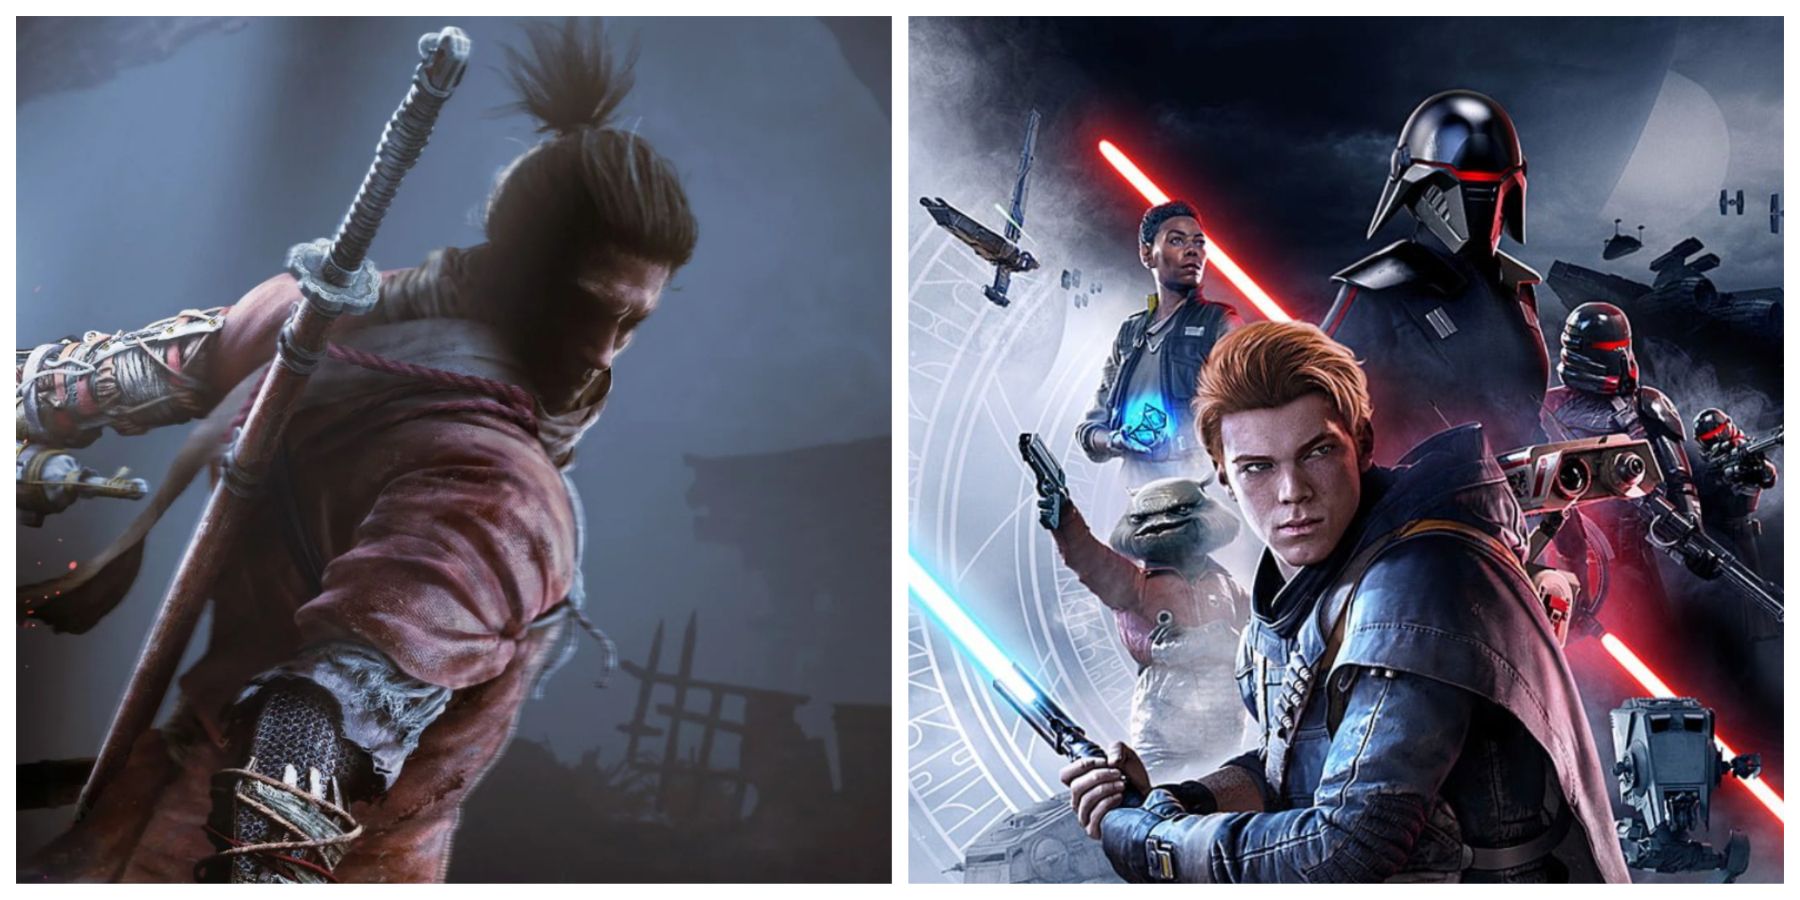 (Left) Sekiro looking towards the camera (Right) Cover art for Star Wars: Jedi Fallen Order with the key characters